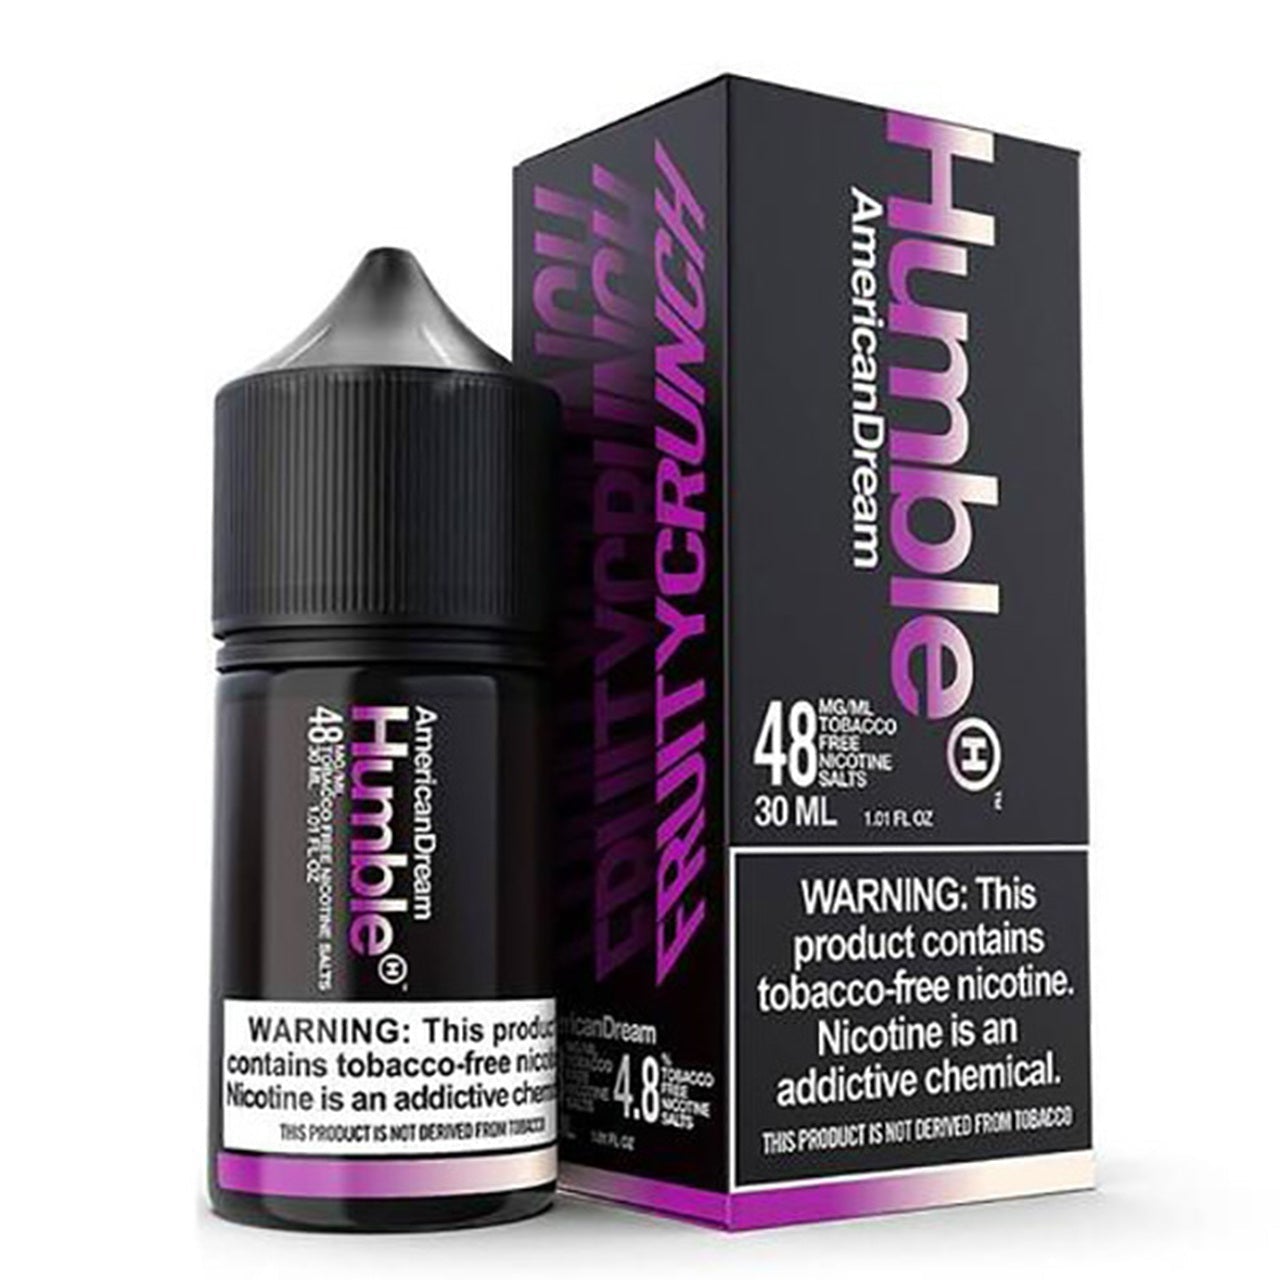 American Dream By Humble Salts Tobacco-Free Nicotine Series 30mL with Packaging